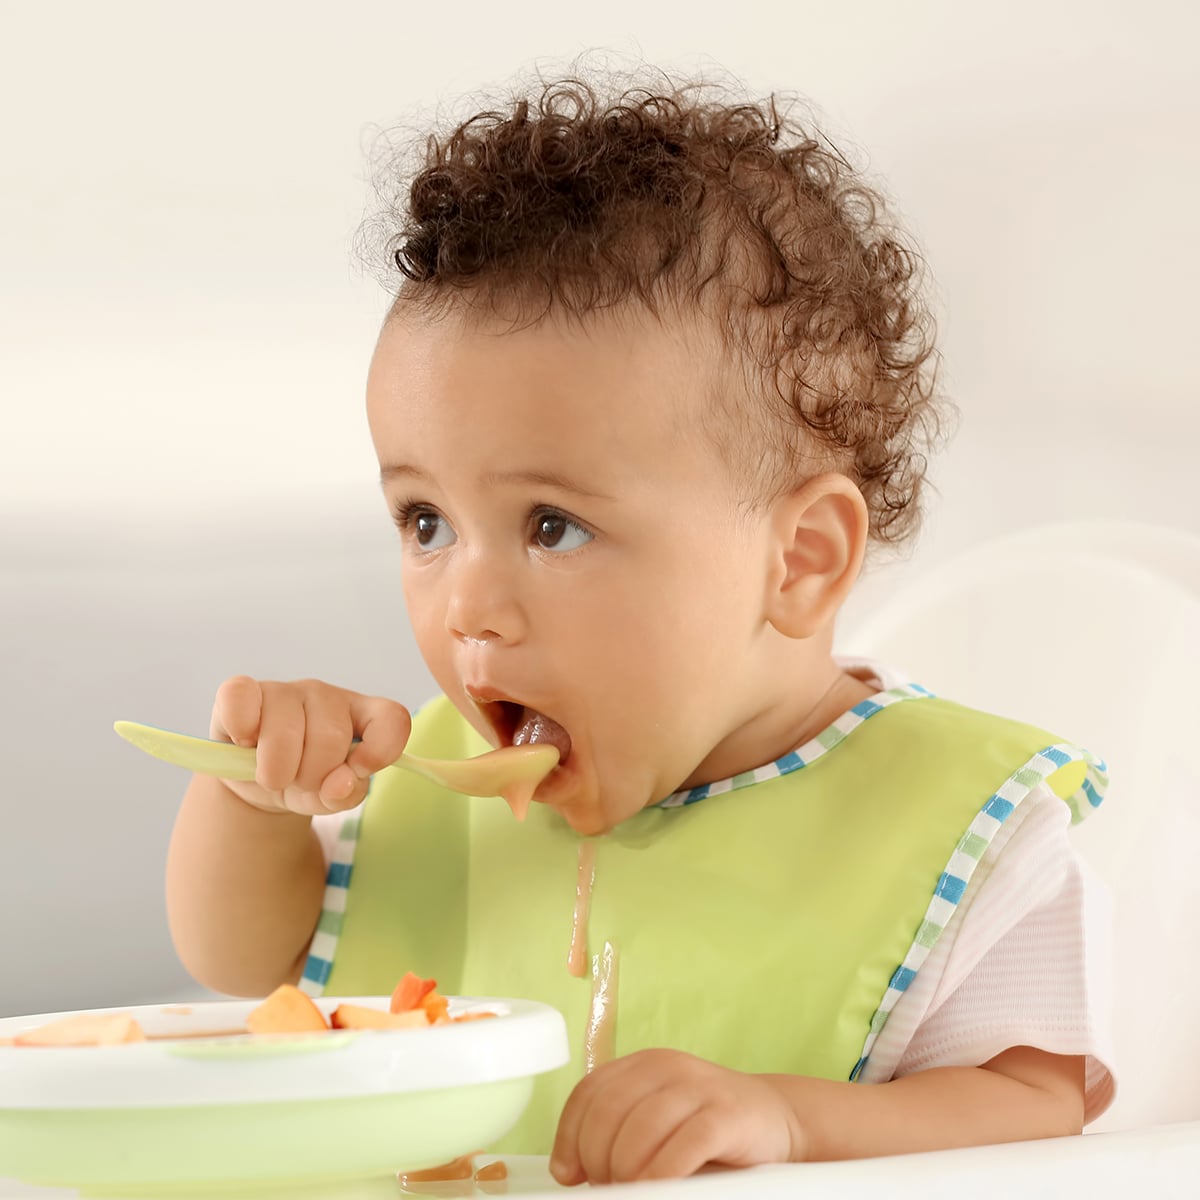 Purchase Healthy Meal Options That Meet Your Toddler’s Needs